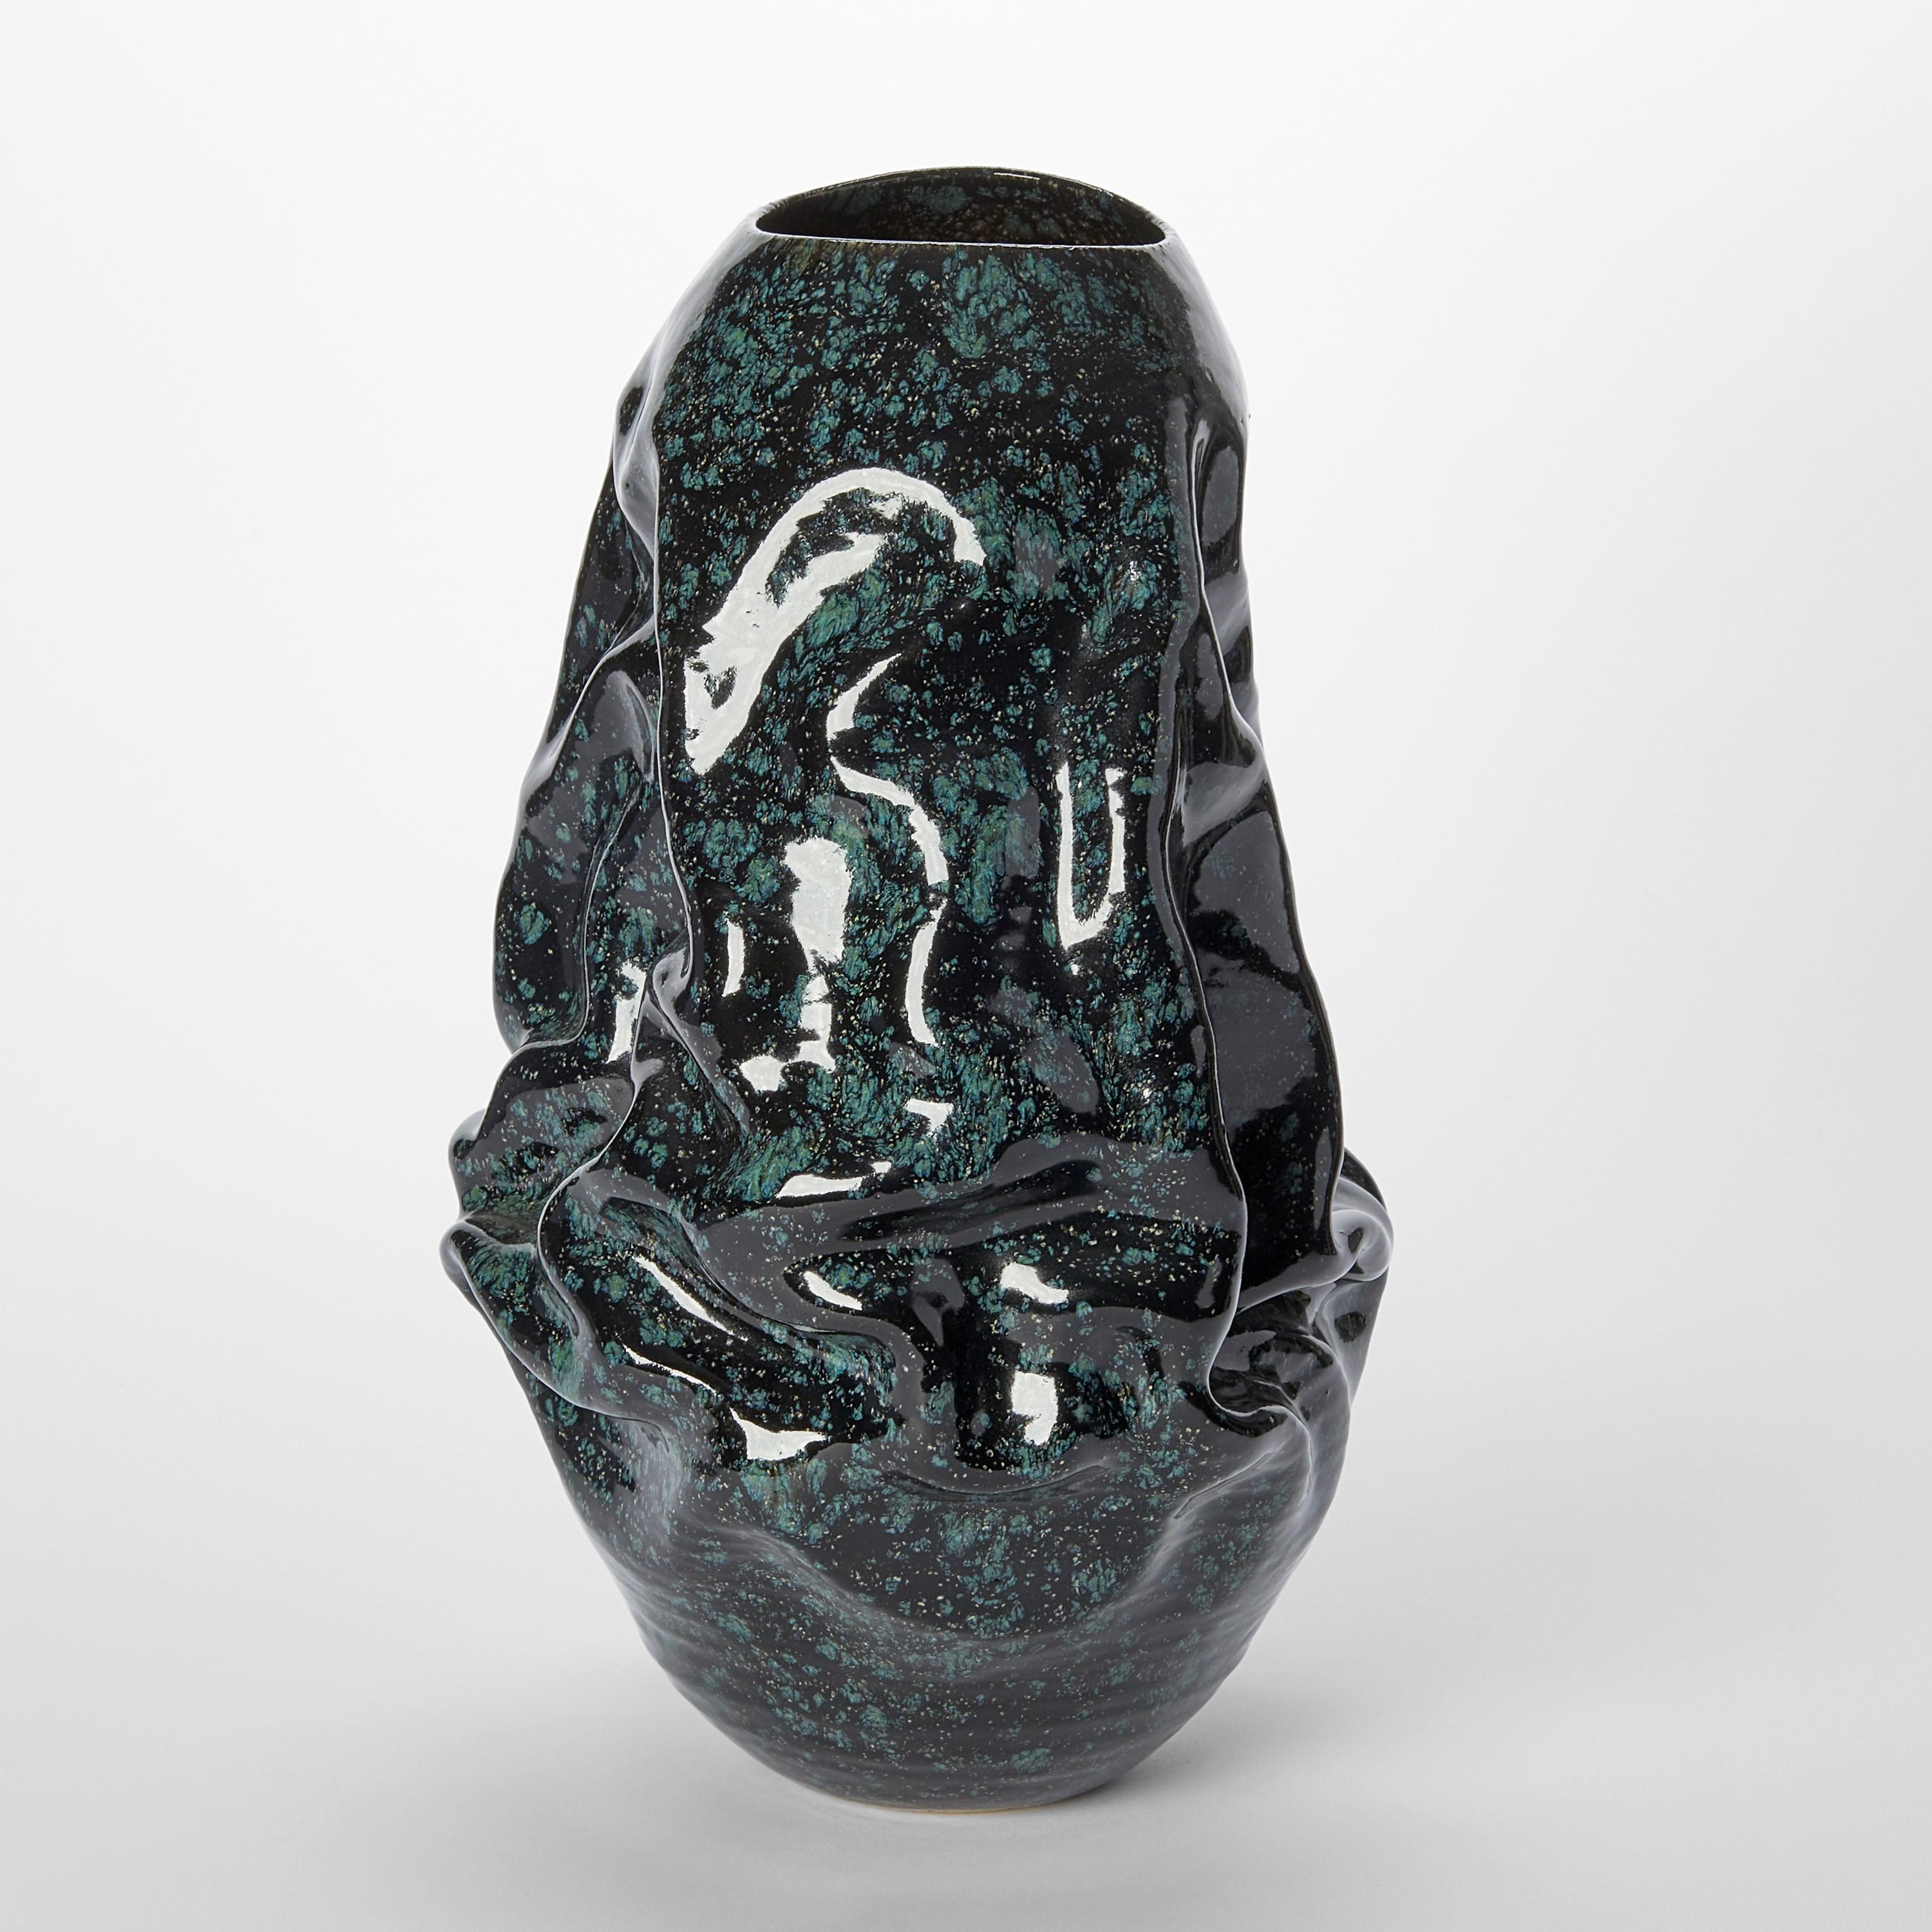 Hand-Crafted Dehydrated Form with Cosmic Black Glaze No 115 by Nicholas Arroyave-Portela For Sale